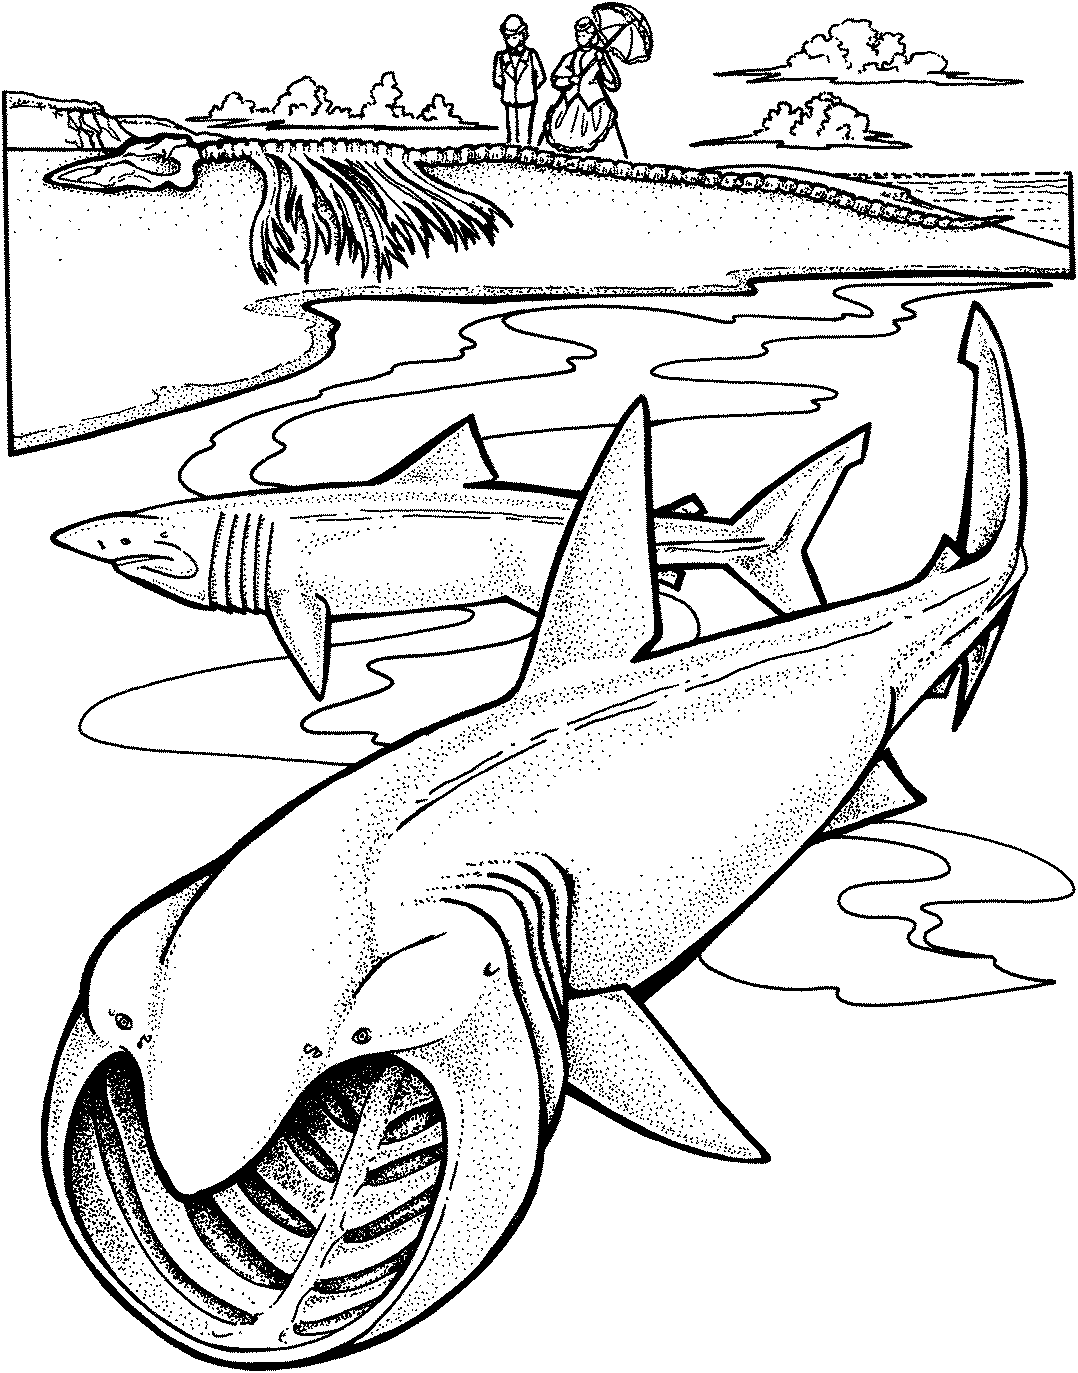 Big Mouth Shark Coloring Page Free Printable Coloring Pages For Kids